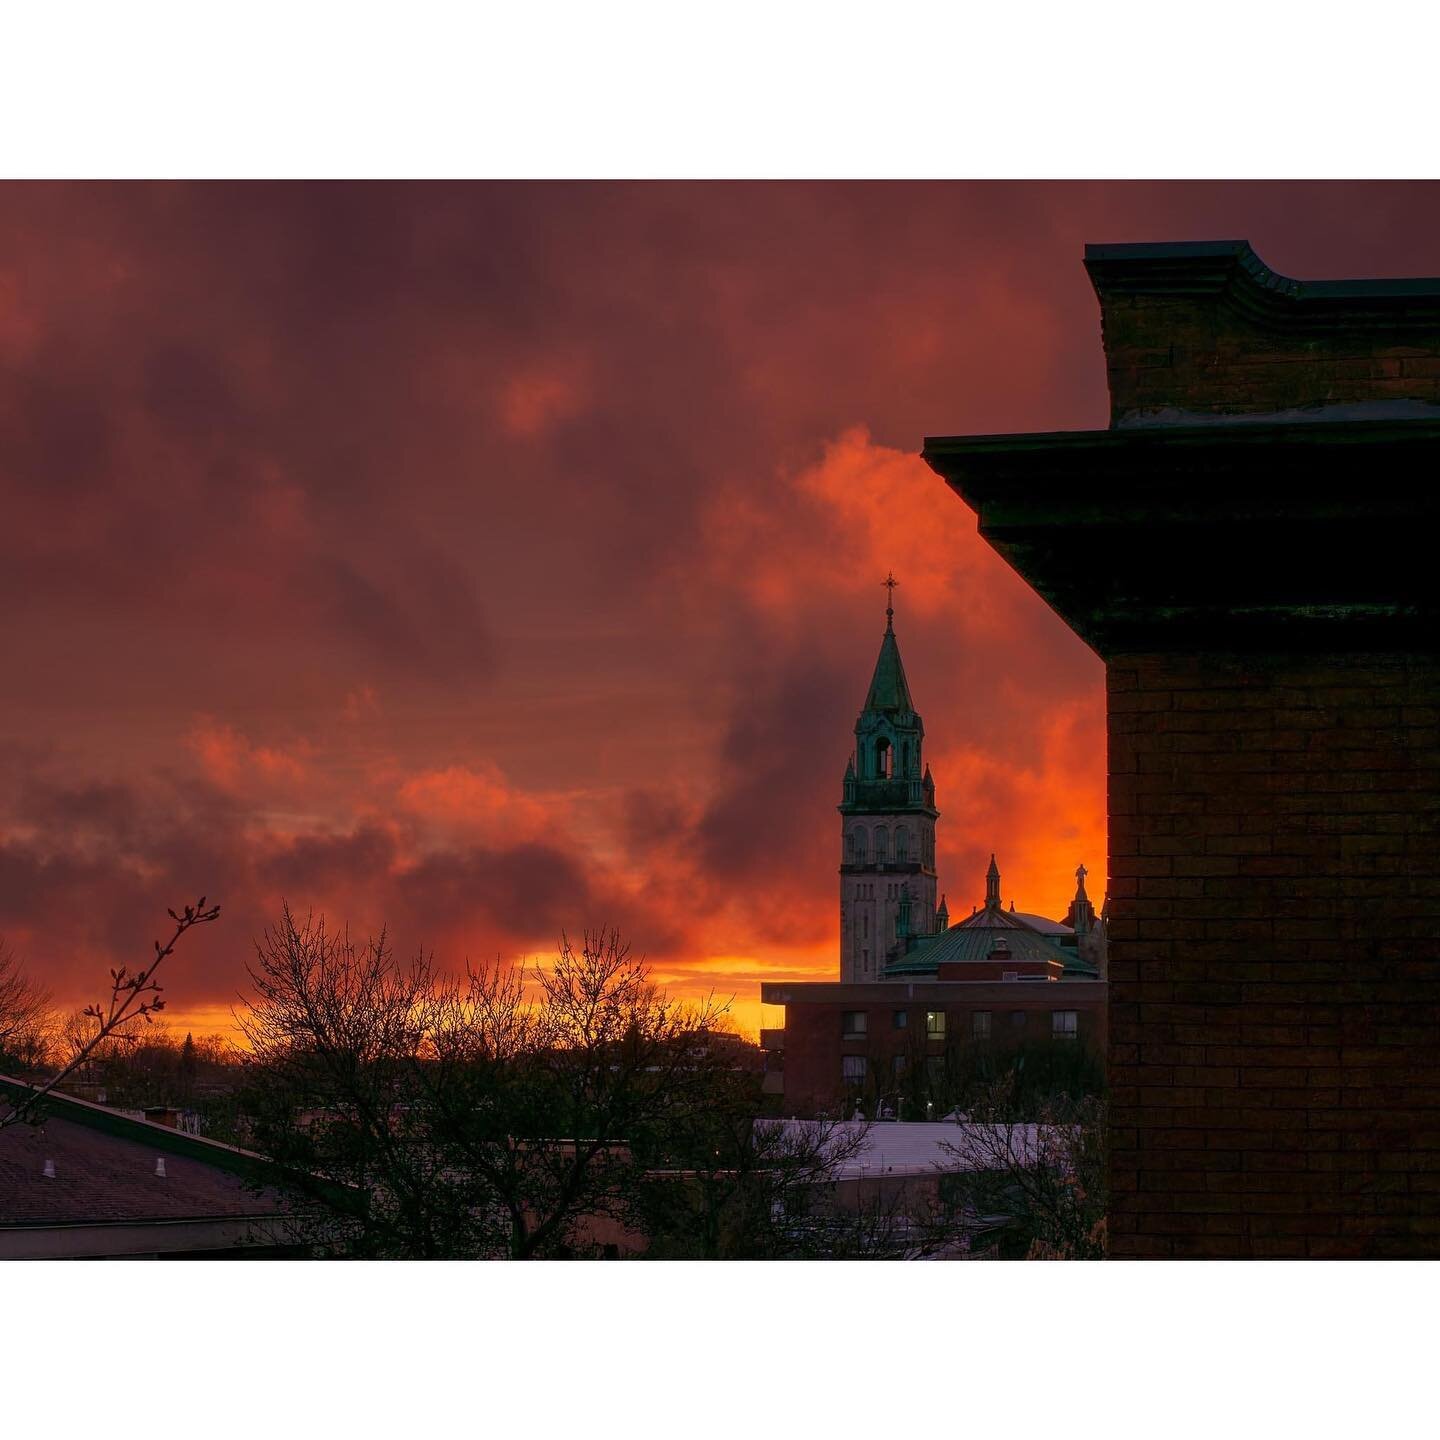 It was a really pretty sunset last night. I was lucky to take a few pictures at the tail end of it. Lumix 35-100mm was handy, and then I cropped the image. #lumix35100 #sunset #steeple #cloudporn #ooo #montrealphotographer #balconyview